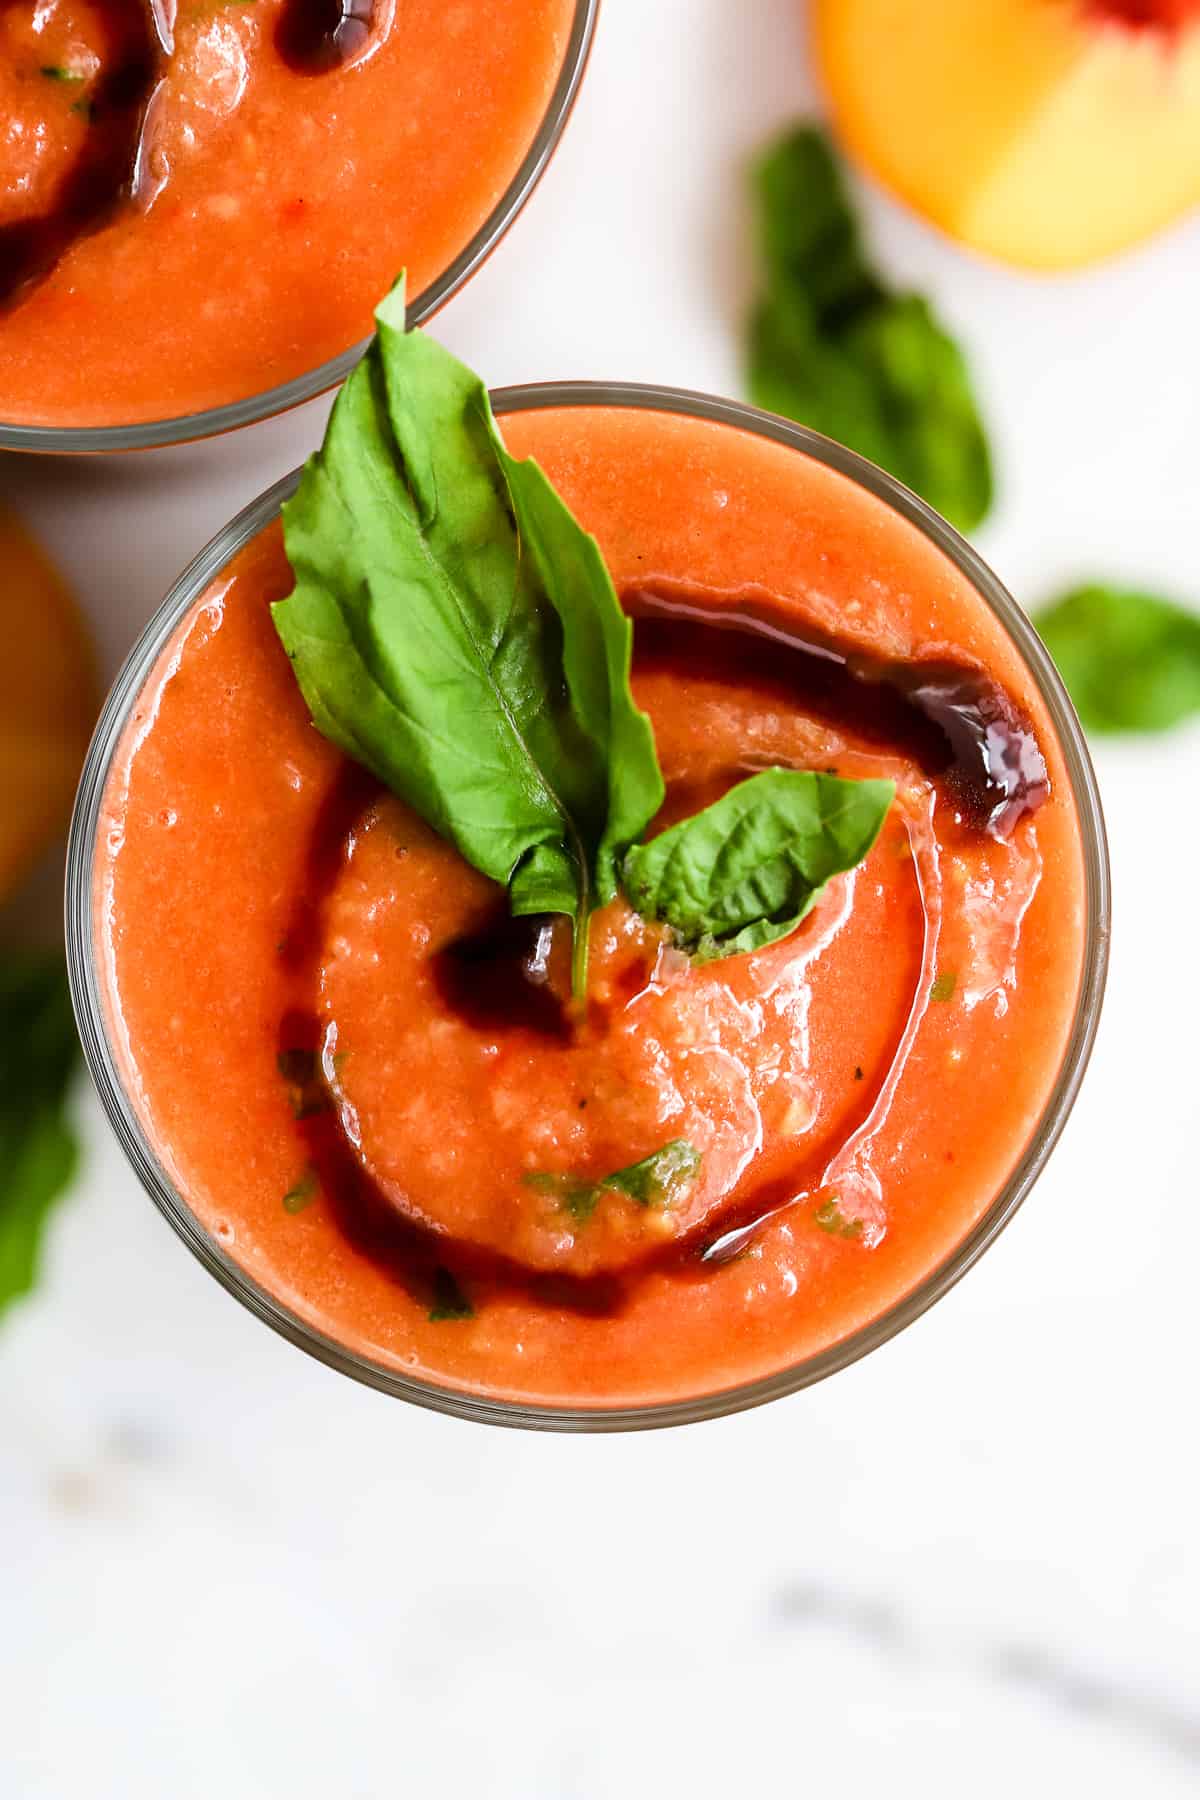 Two glasses of peach basil gazpacho with balsamic glaze swirl on top and basil leaf garnish, on white marble surface